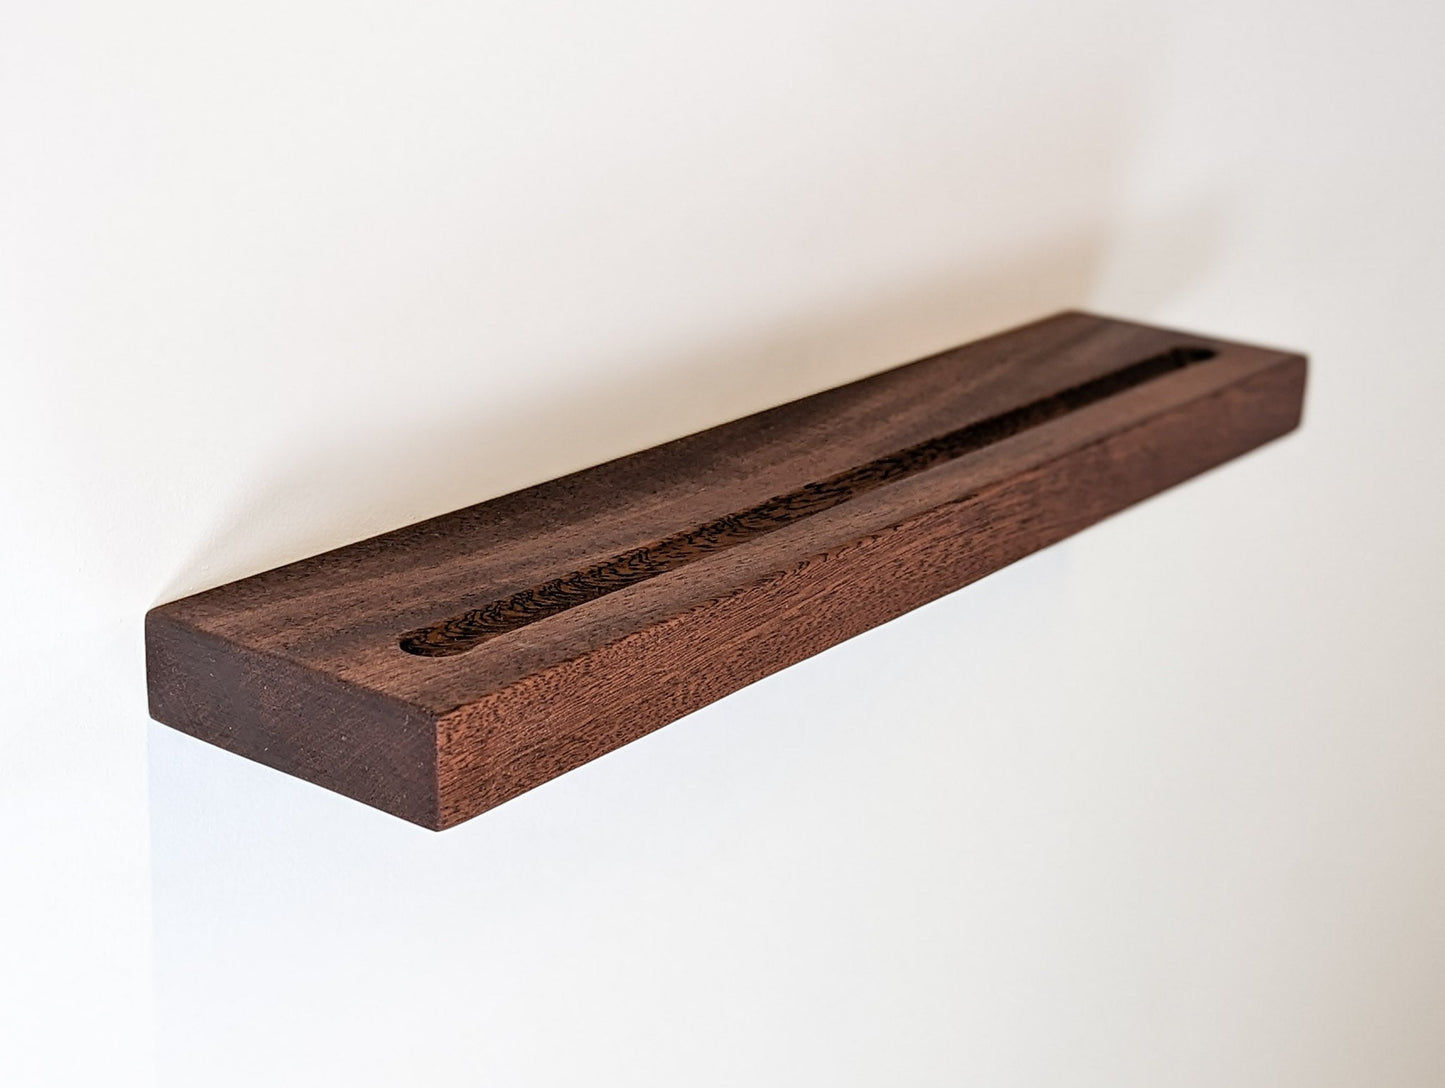 A mahogany floating shelf with a groove is attached to a wall